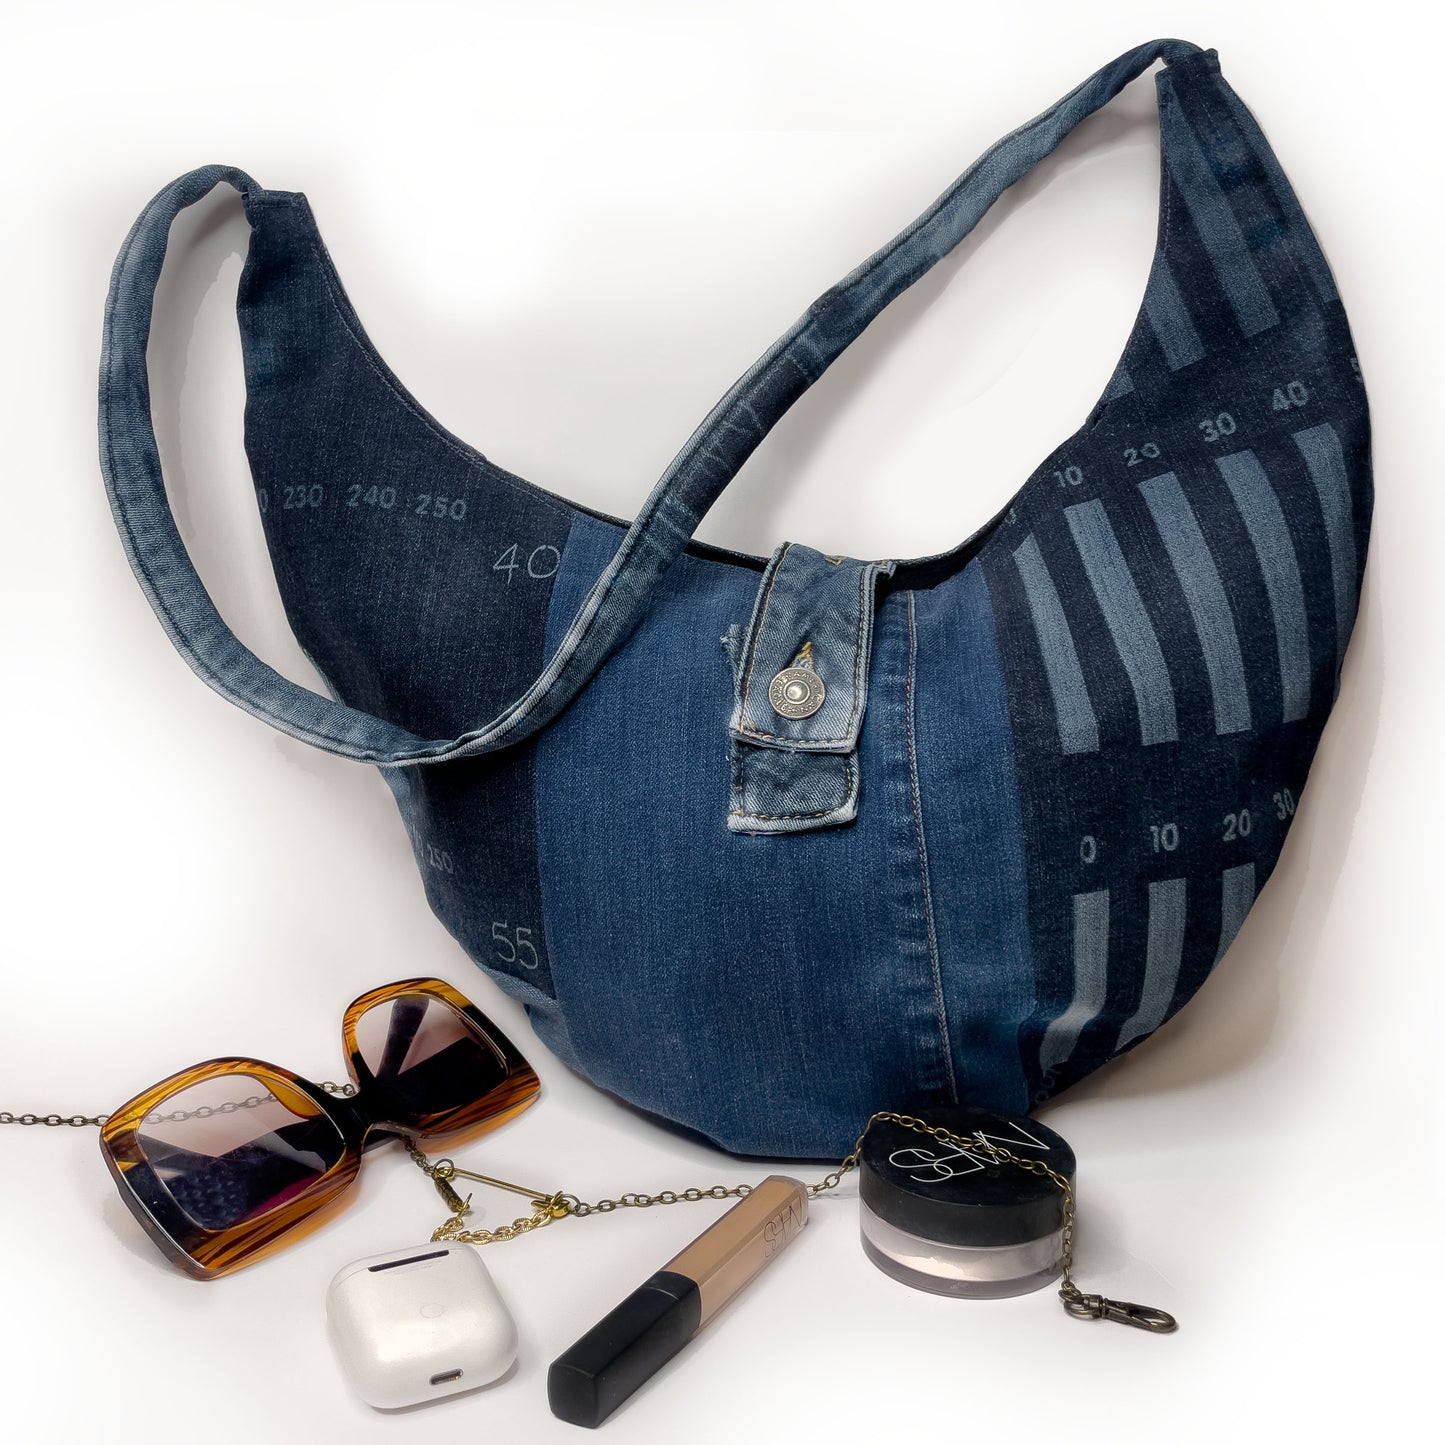 Denim Slouch bag in Indigo. handmade unique handbags, recycled denim bags, handmade genuine leather bags,  completely one of a kind bags made by local brooklyn designers.